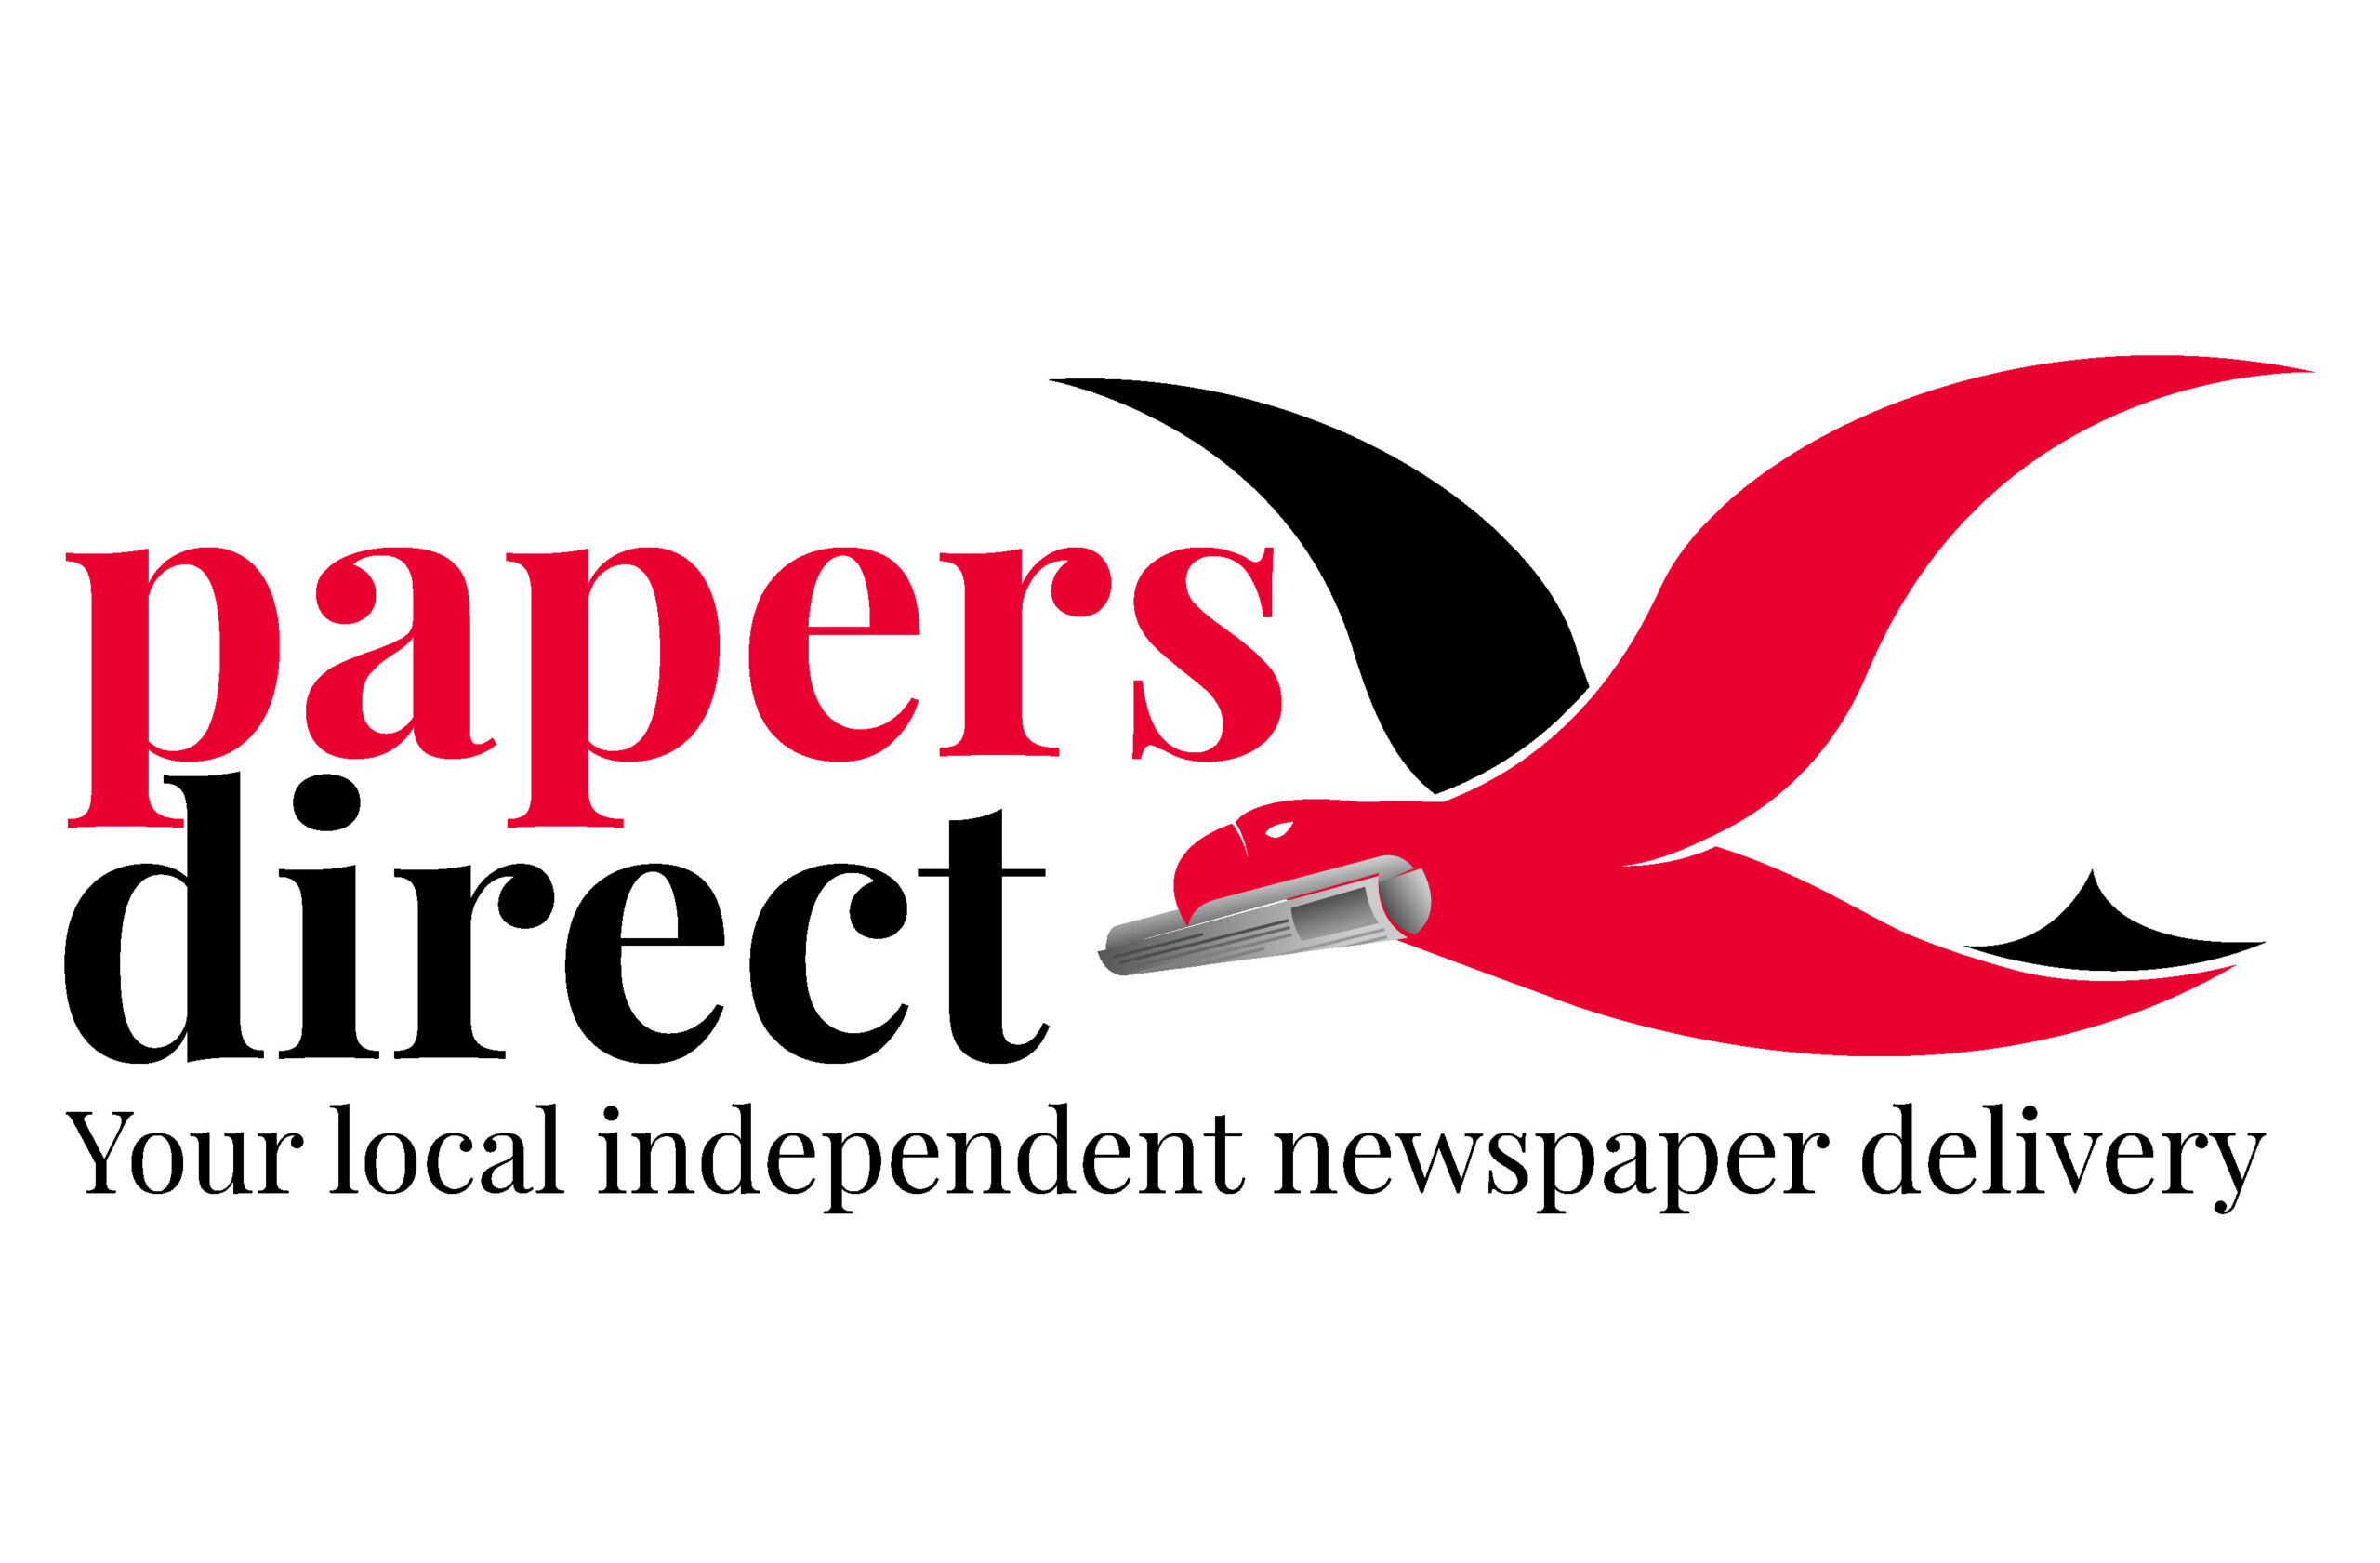 papersdirect for local newspaper delivery